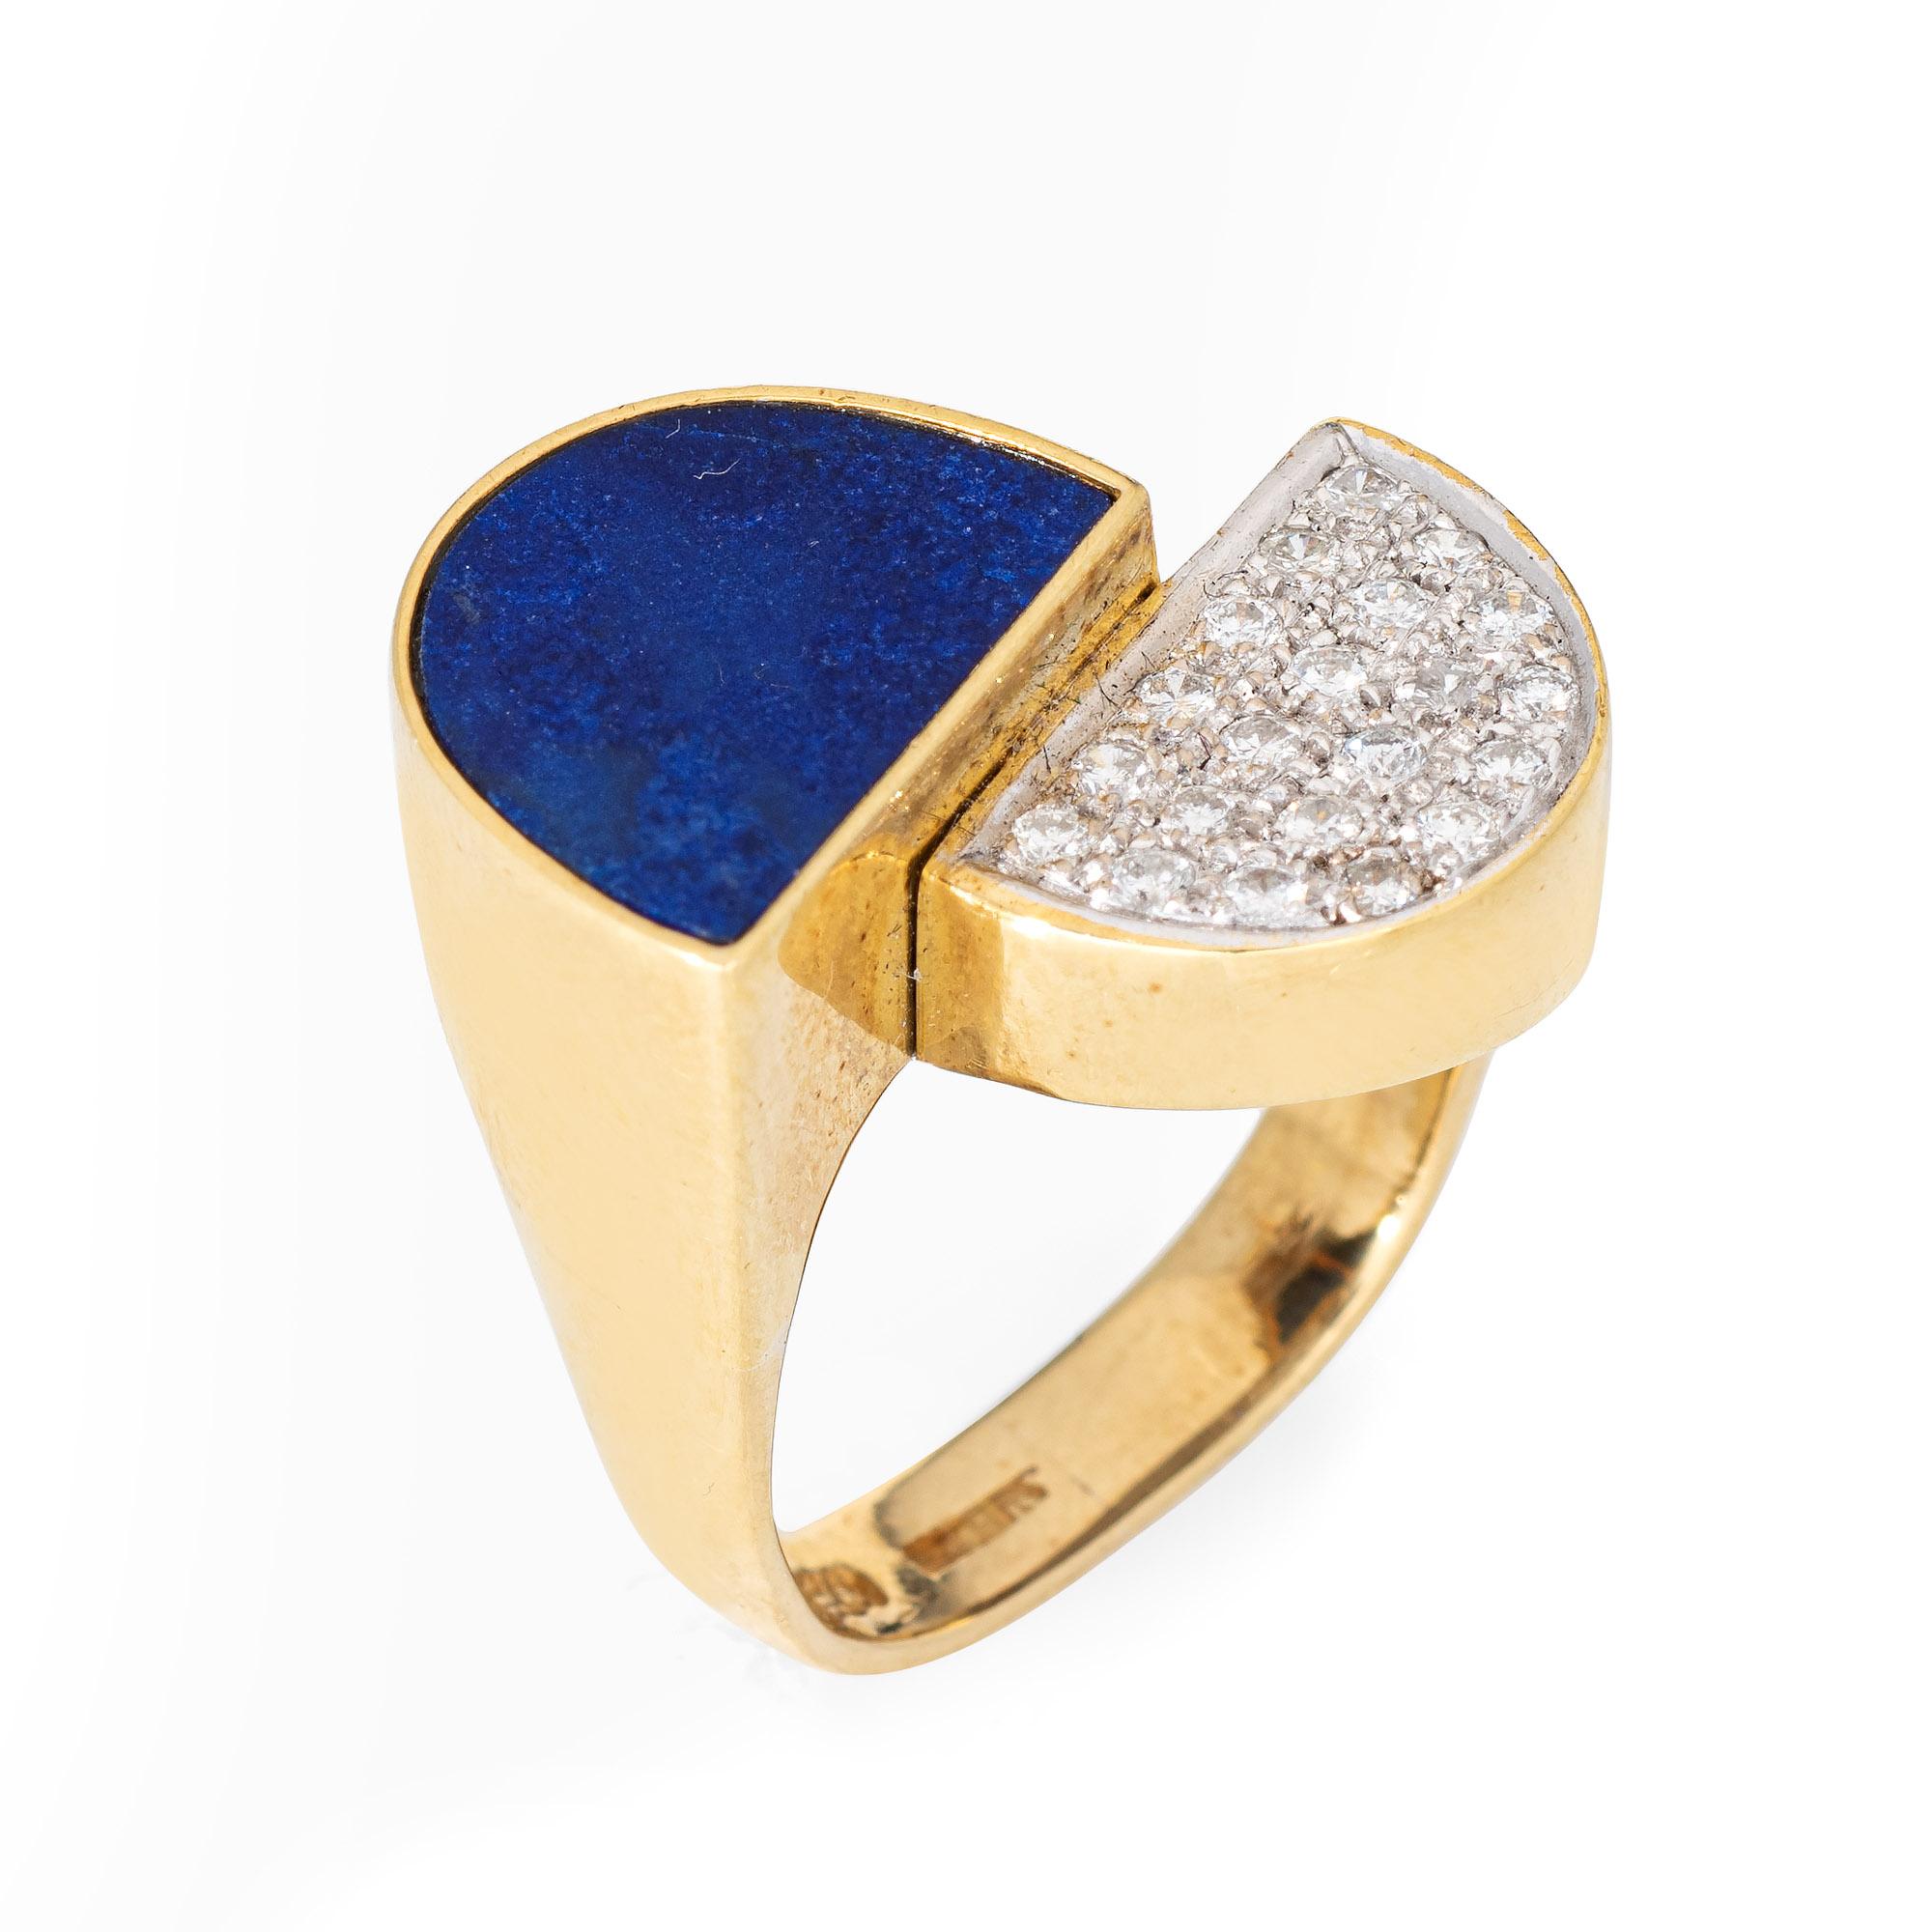 Distinct and stylish lapis lazuli & diamond 'half moons' ring crafted in 18 karat yellow gold (circa 1970s). 

Inlaid lapis lazuli measures 12mm x 9mm. Pave set diamonds total an estimated 0.21 carats (estimated at H-I color and VS2-SI2 clarity).